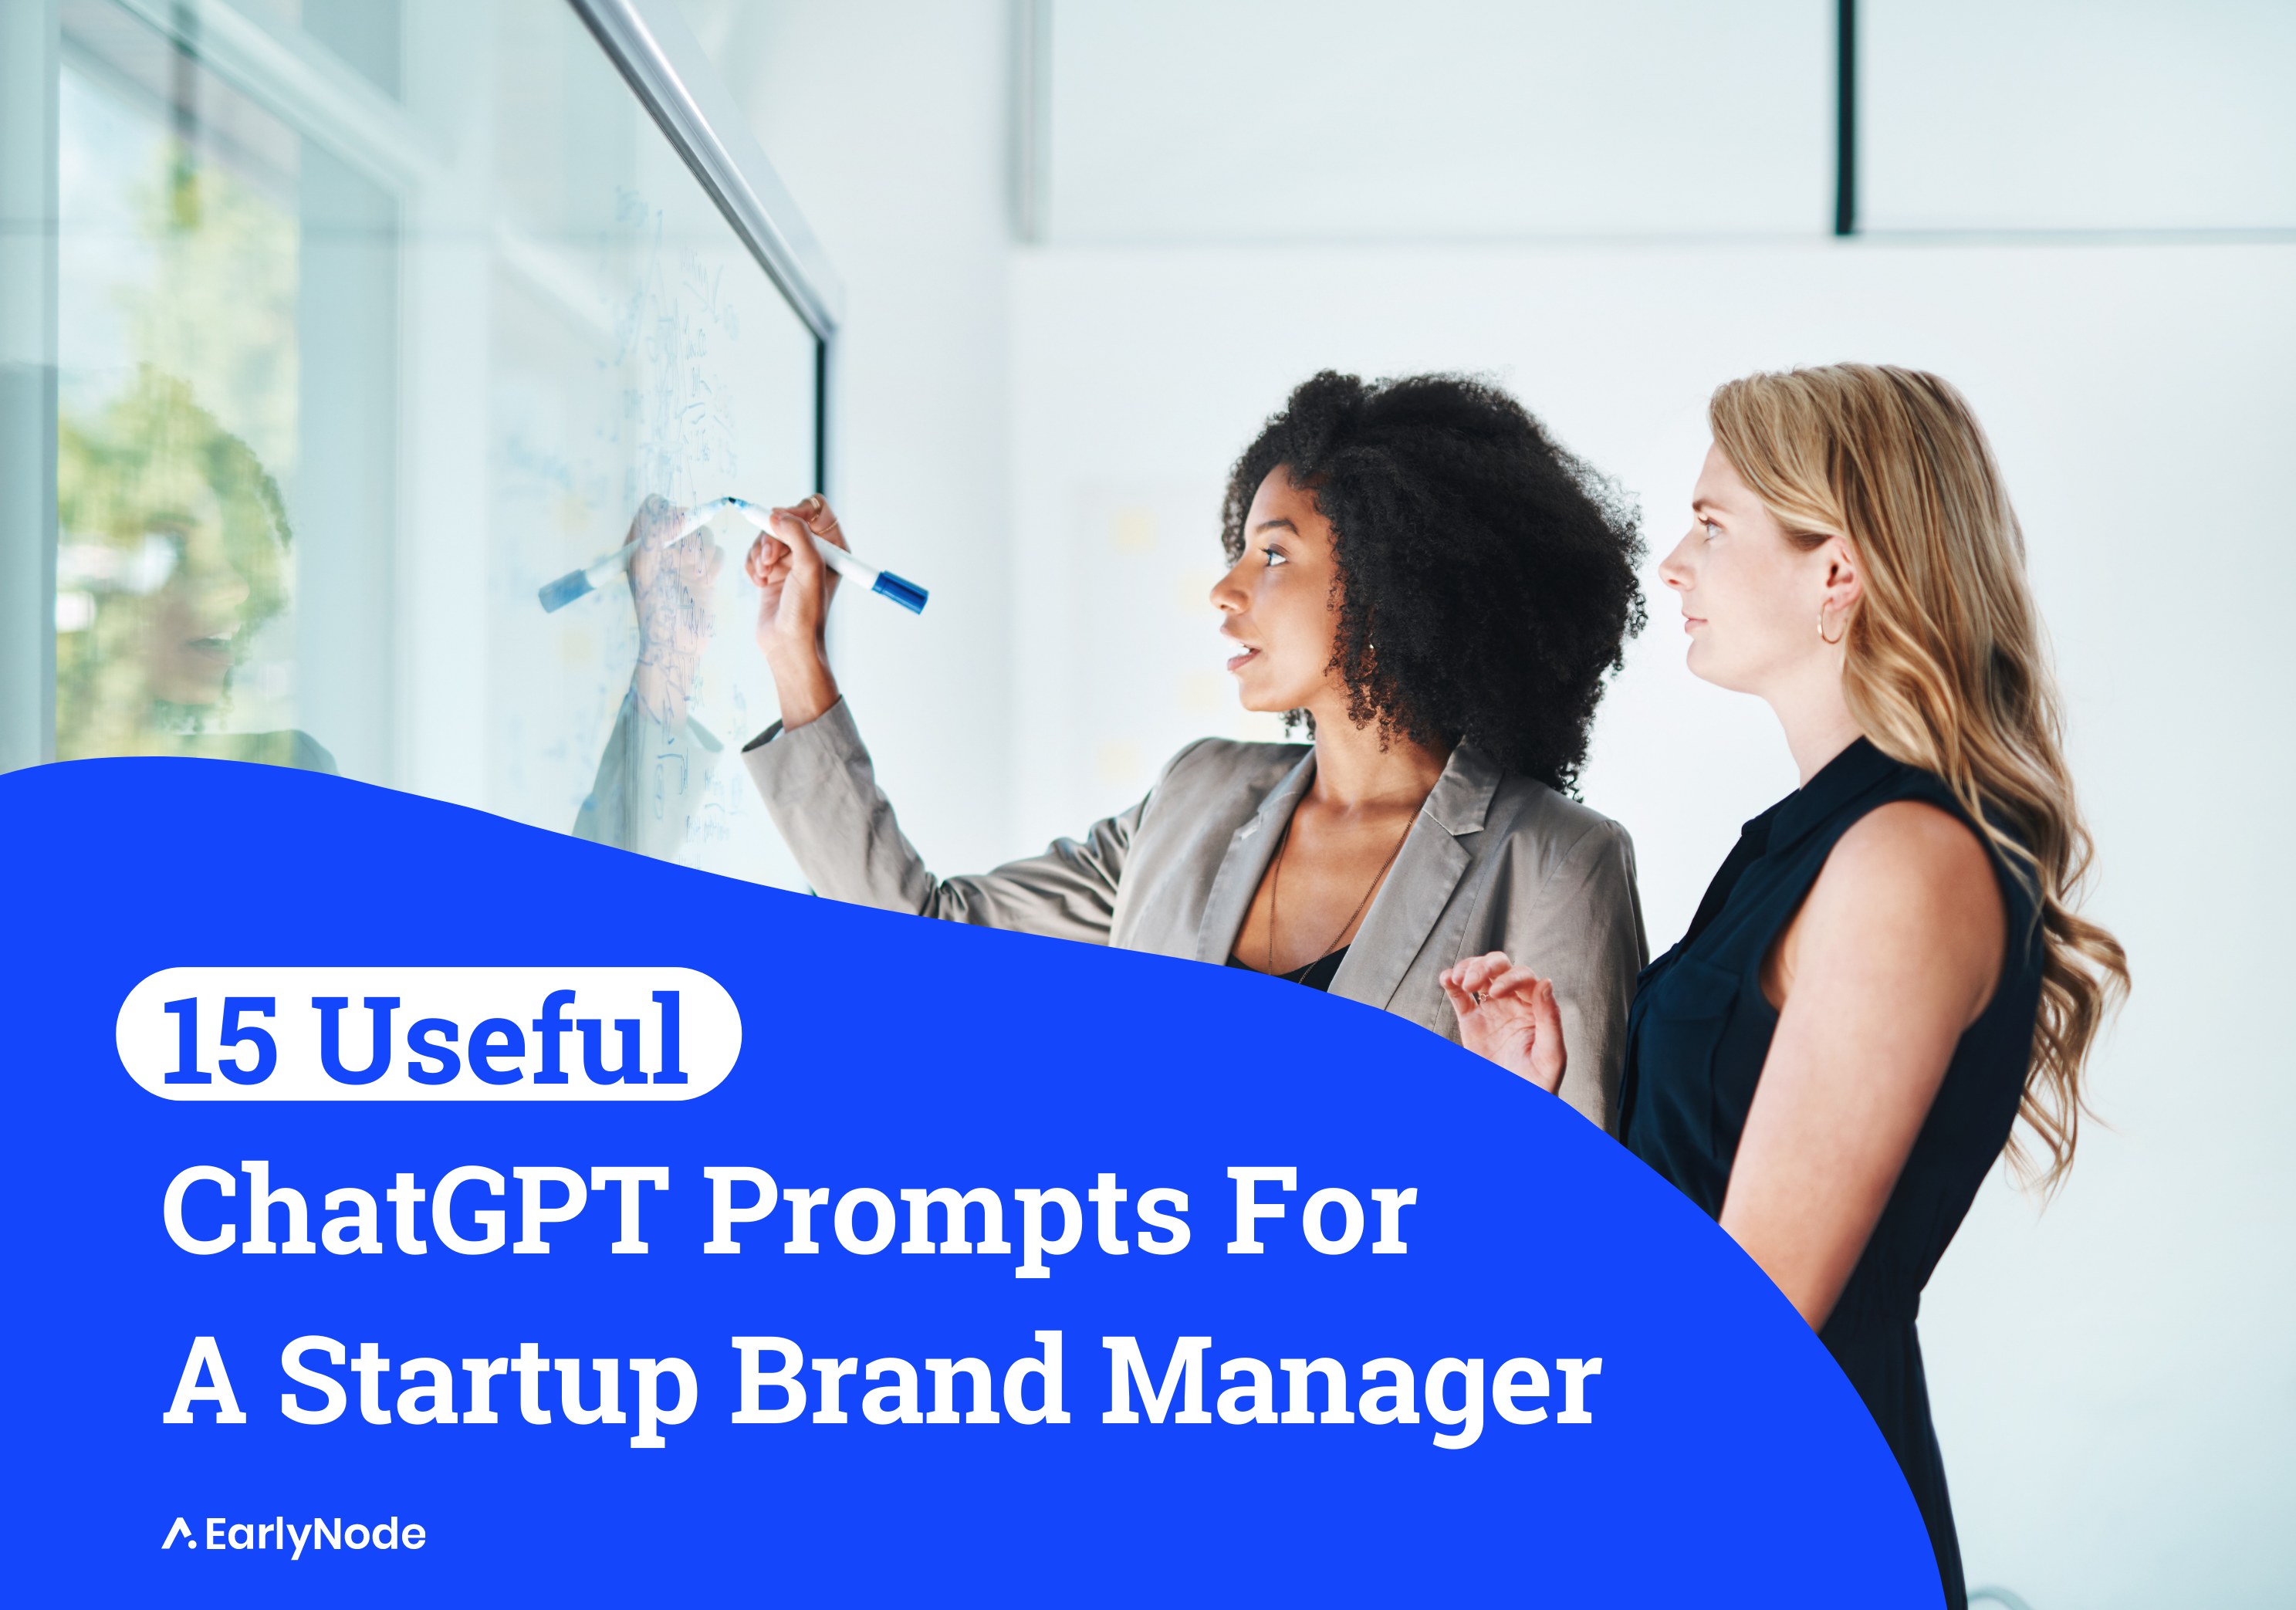 15 Useful ChatGPT Prompts for Brand Managers